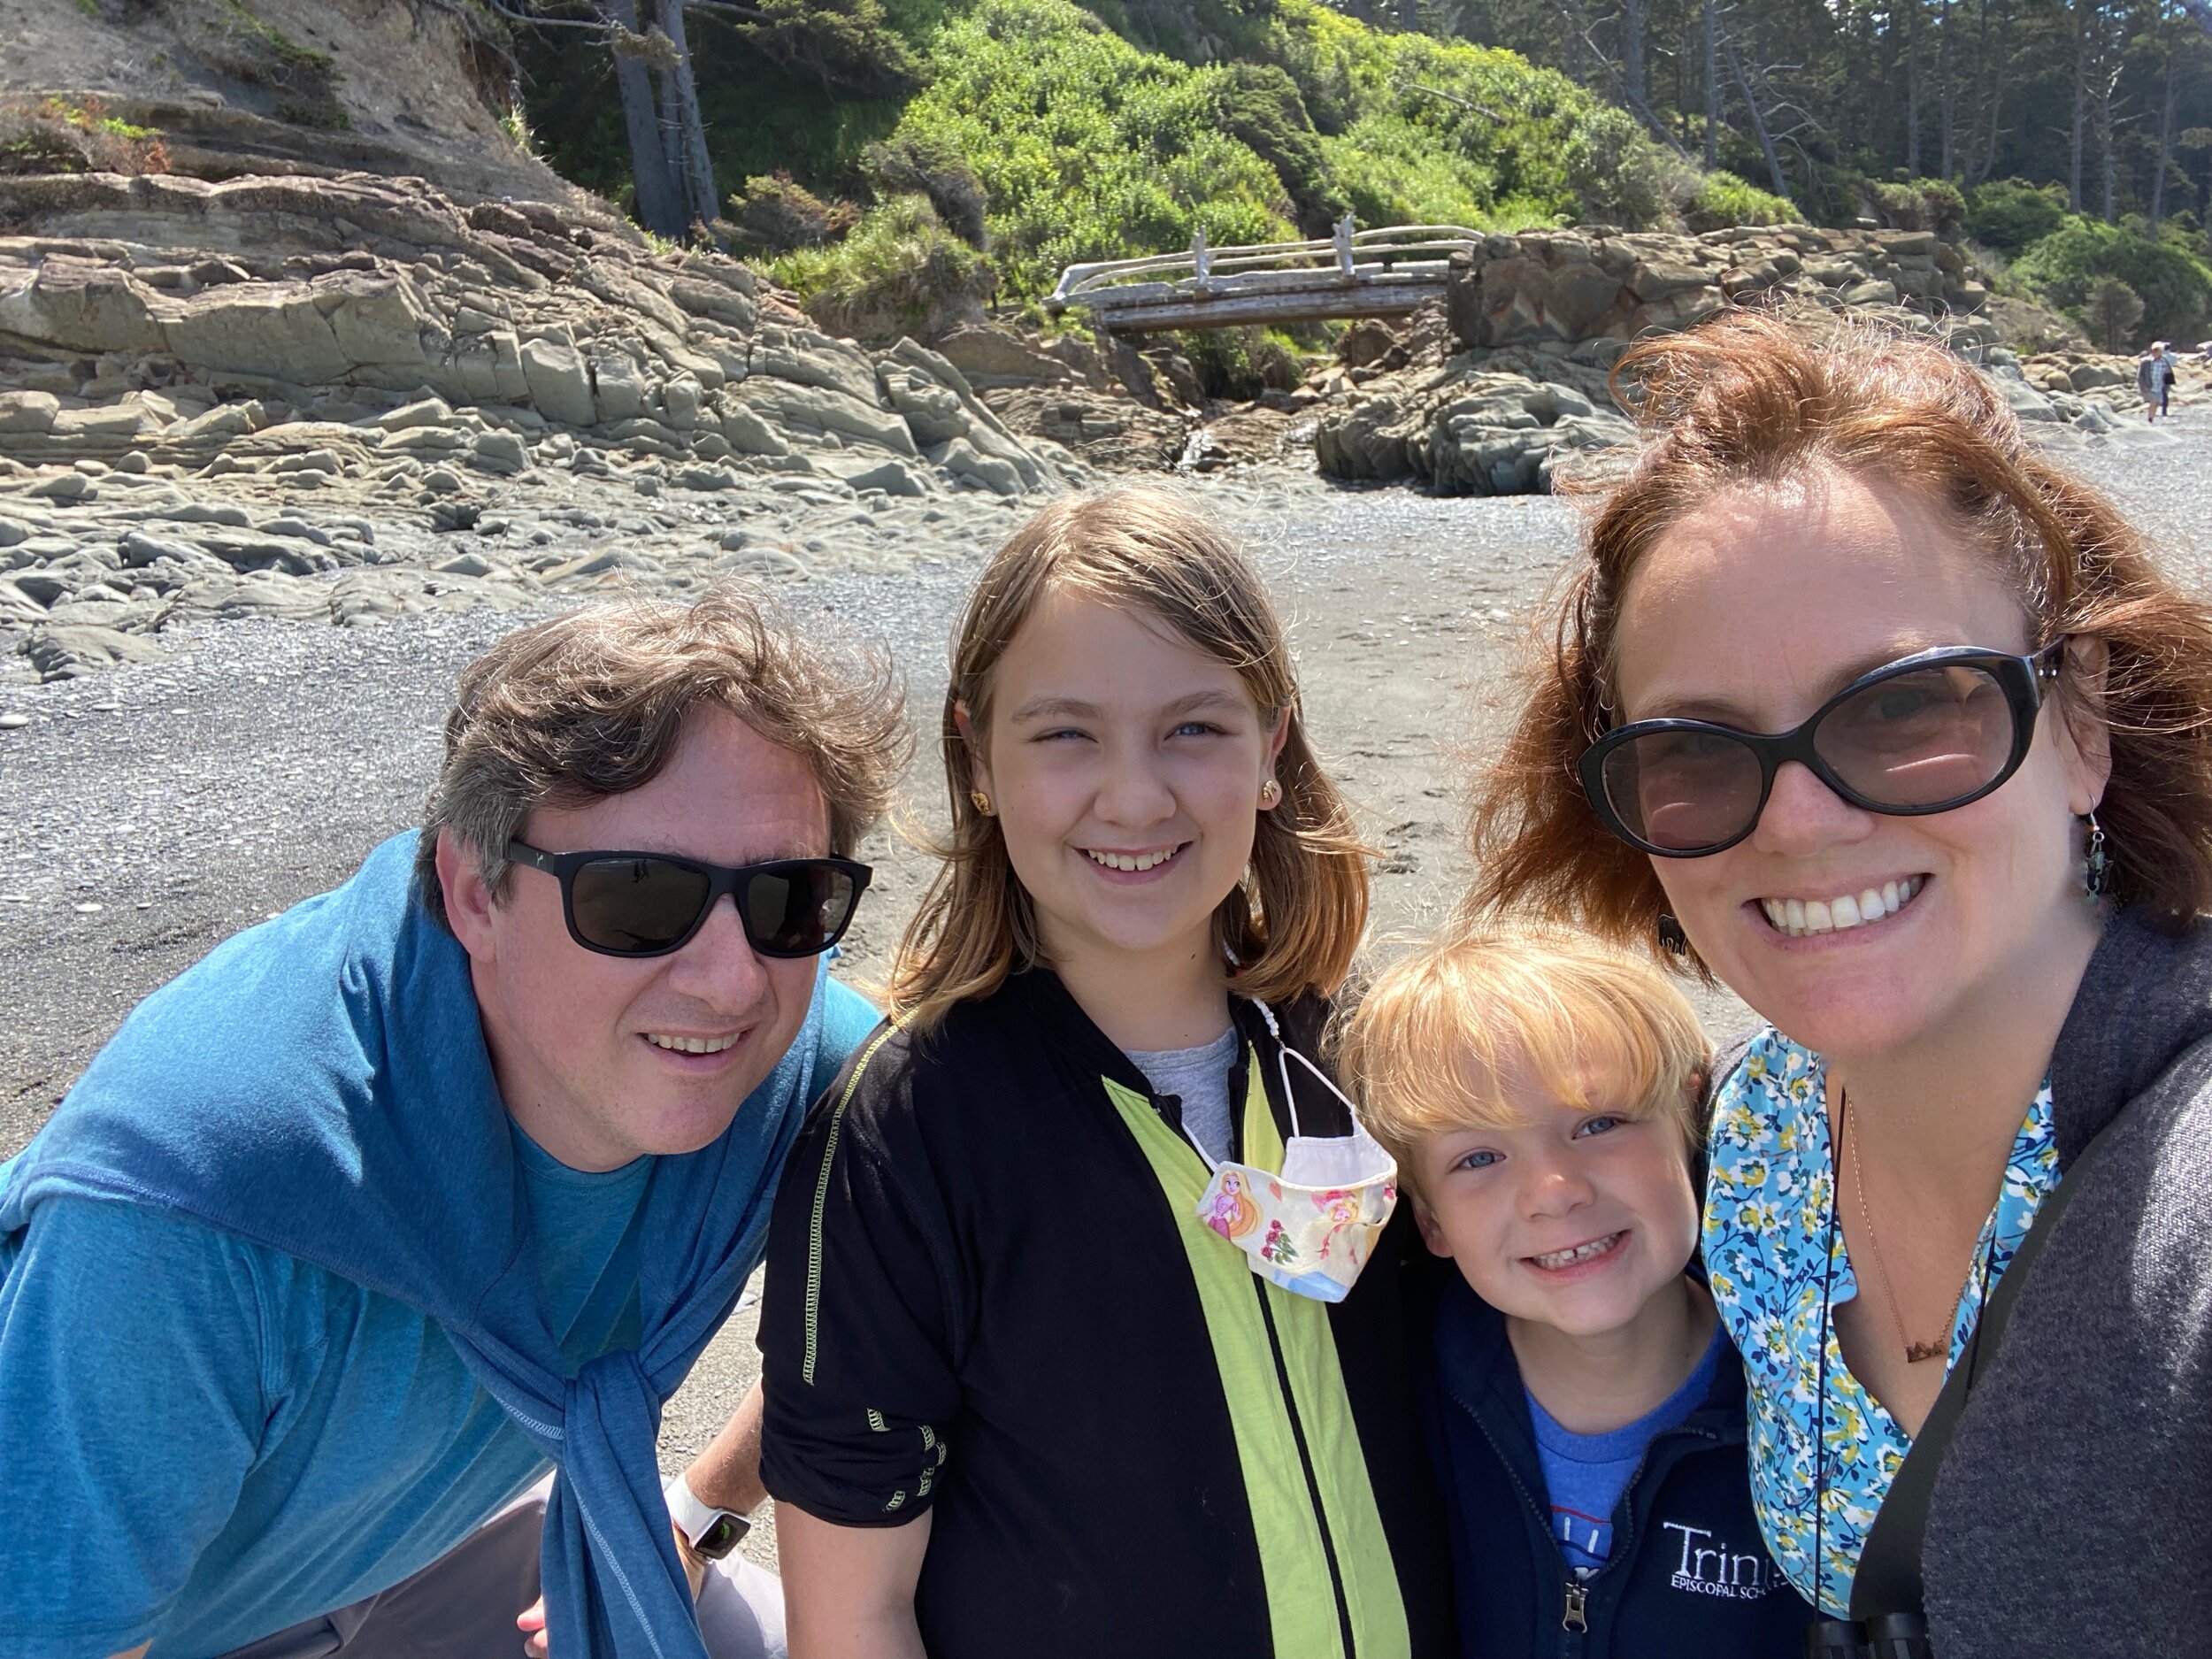 Our family (bridge and rock formation down to the beach behind us) after a fun and successful adventure tide-pooling at Beach 4